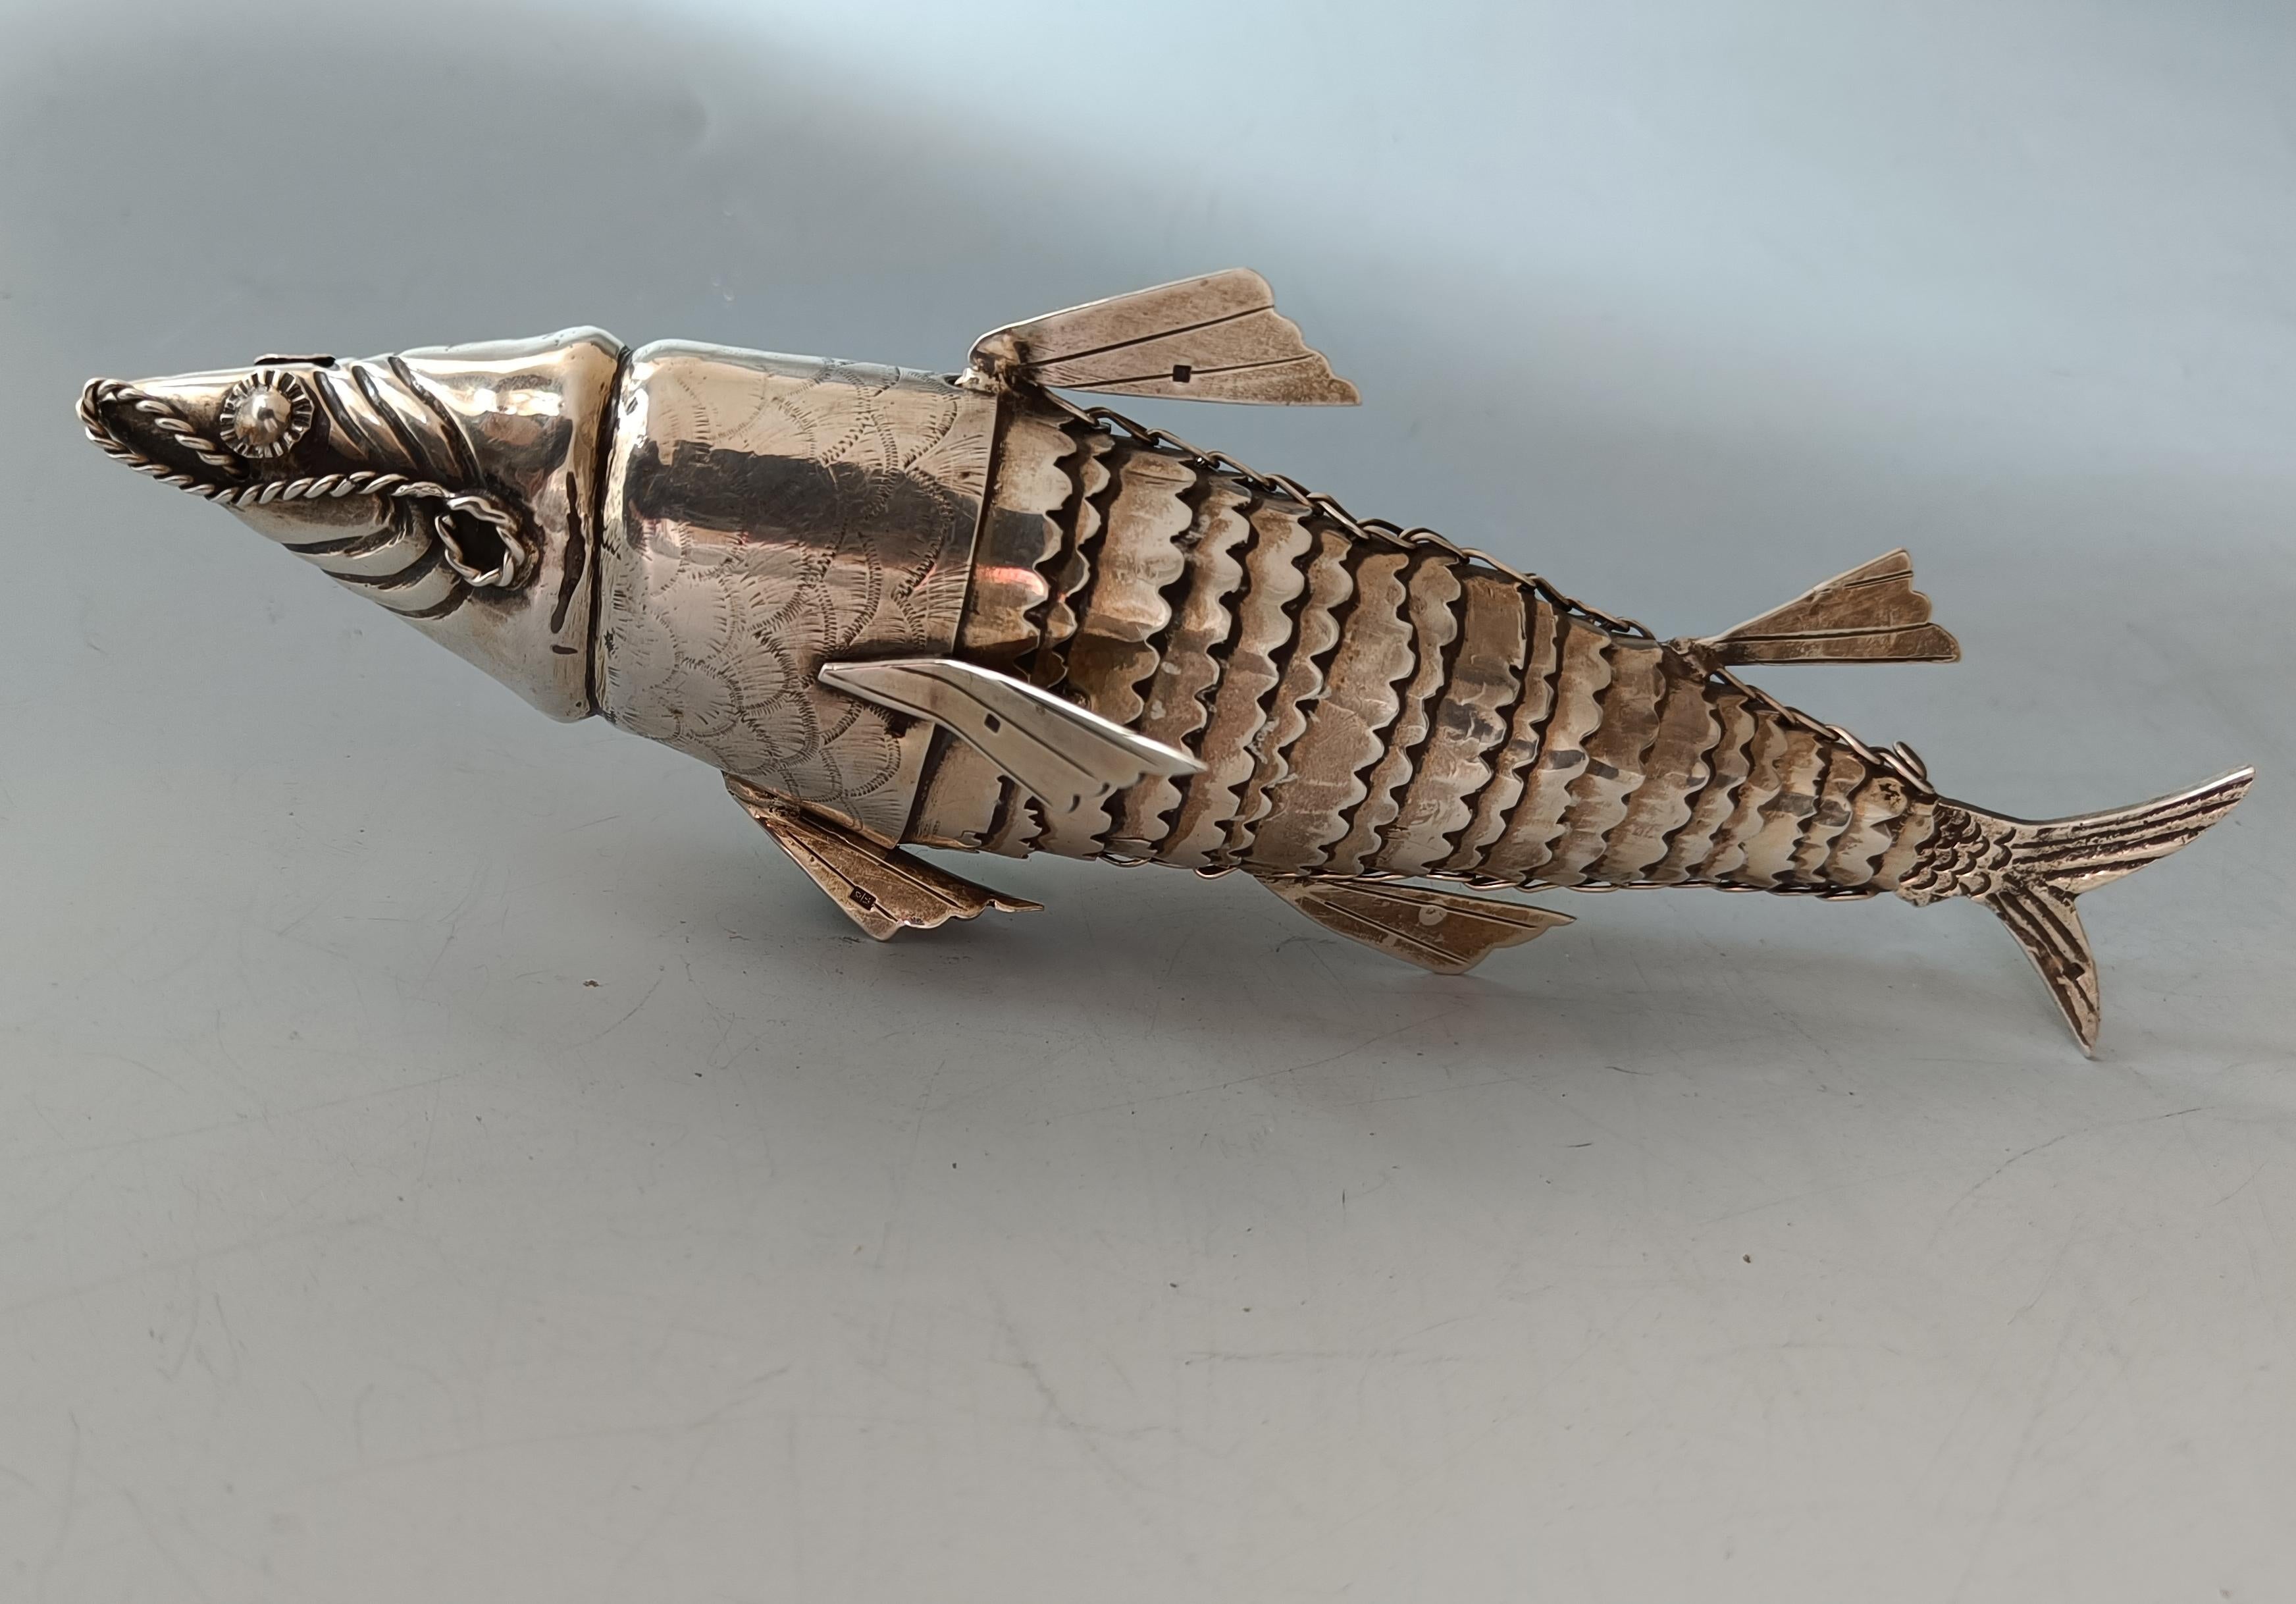 Fine quality Antique Silver articulated fish Hallmarked
A very fine quality Articulated silver fish model
Expertly crafted with beautifully detailed silver workmanship,   
Hallmarked in various places with makers mark and symbols probably Egypt 